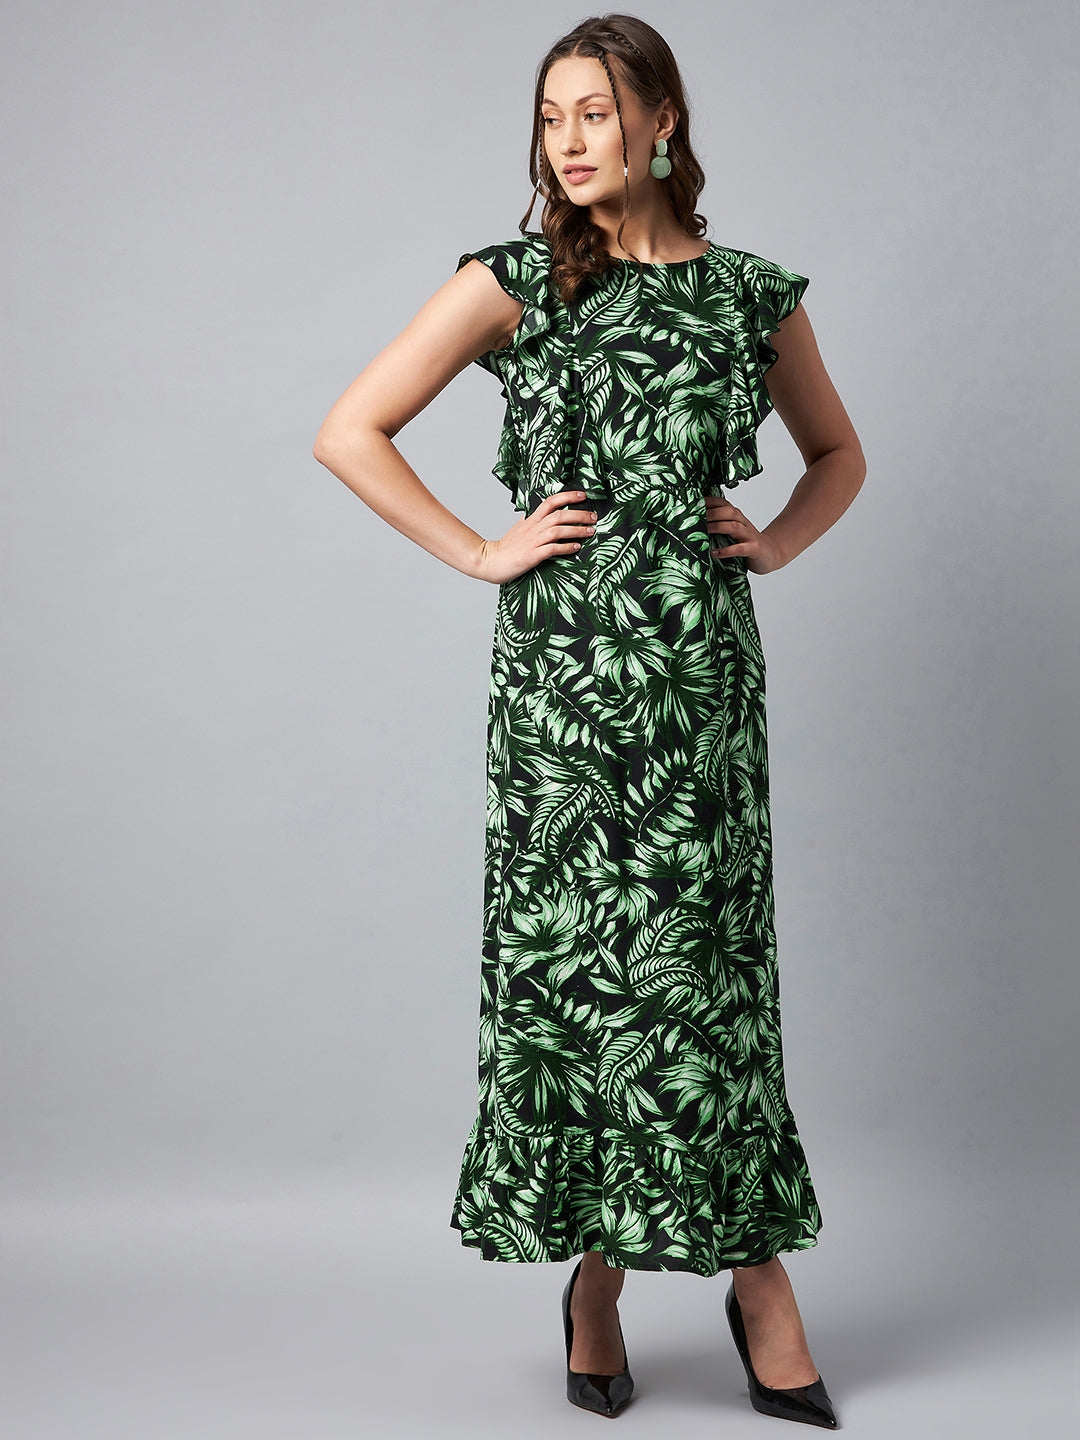 Green-&-Black-Polyester-Puff-Sleeve-Smock-Floral-Maxi-Dress